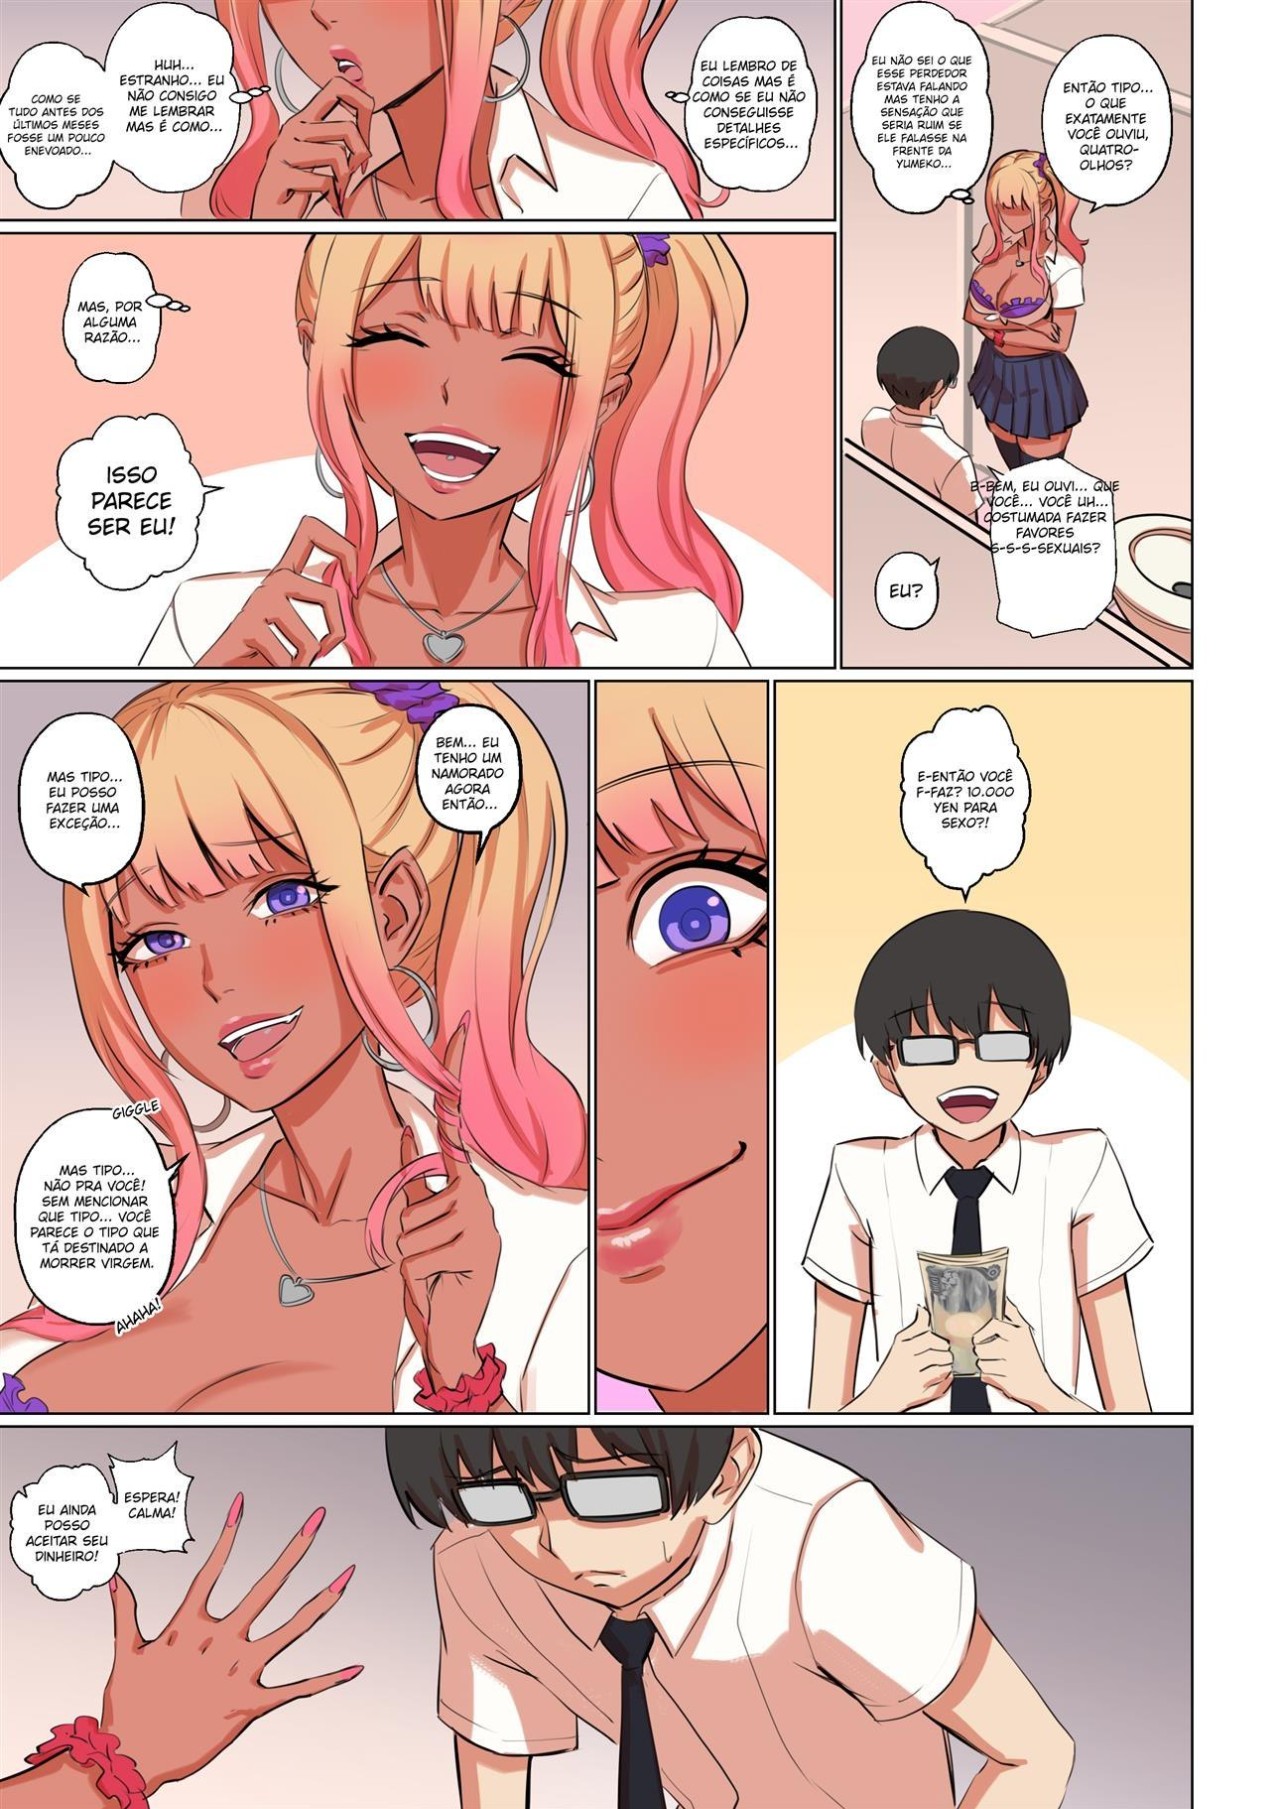 My Shy Best Friend Turned Into a Gal Girl Hentai pt-br 29